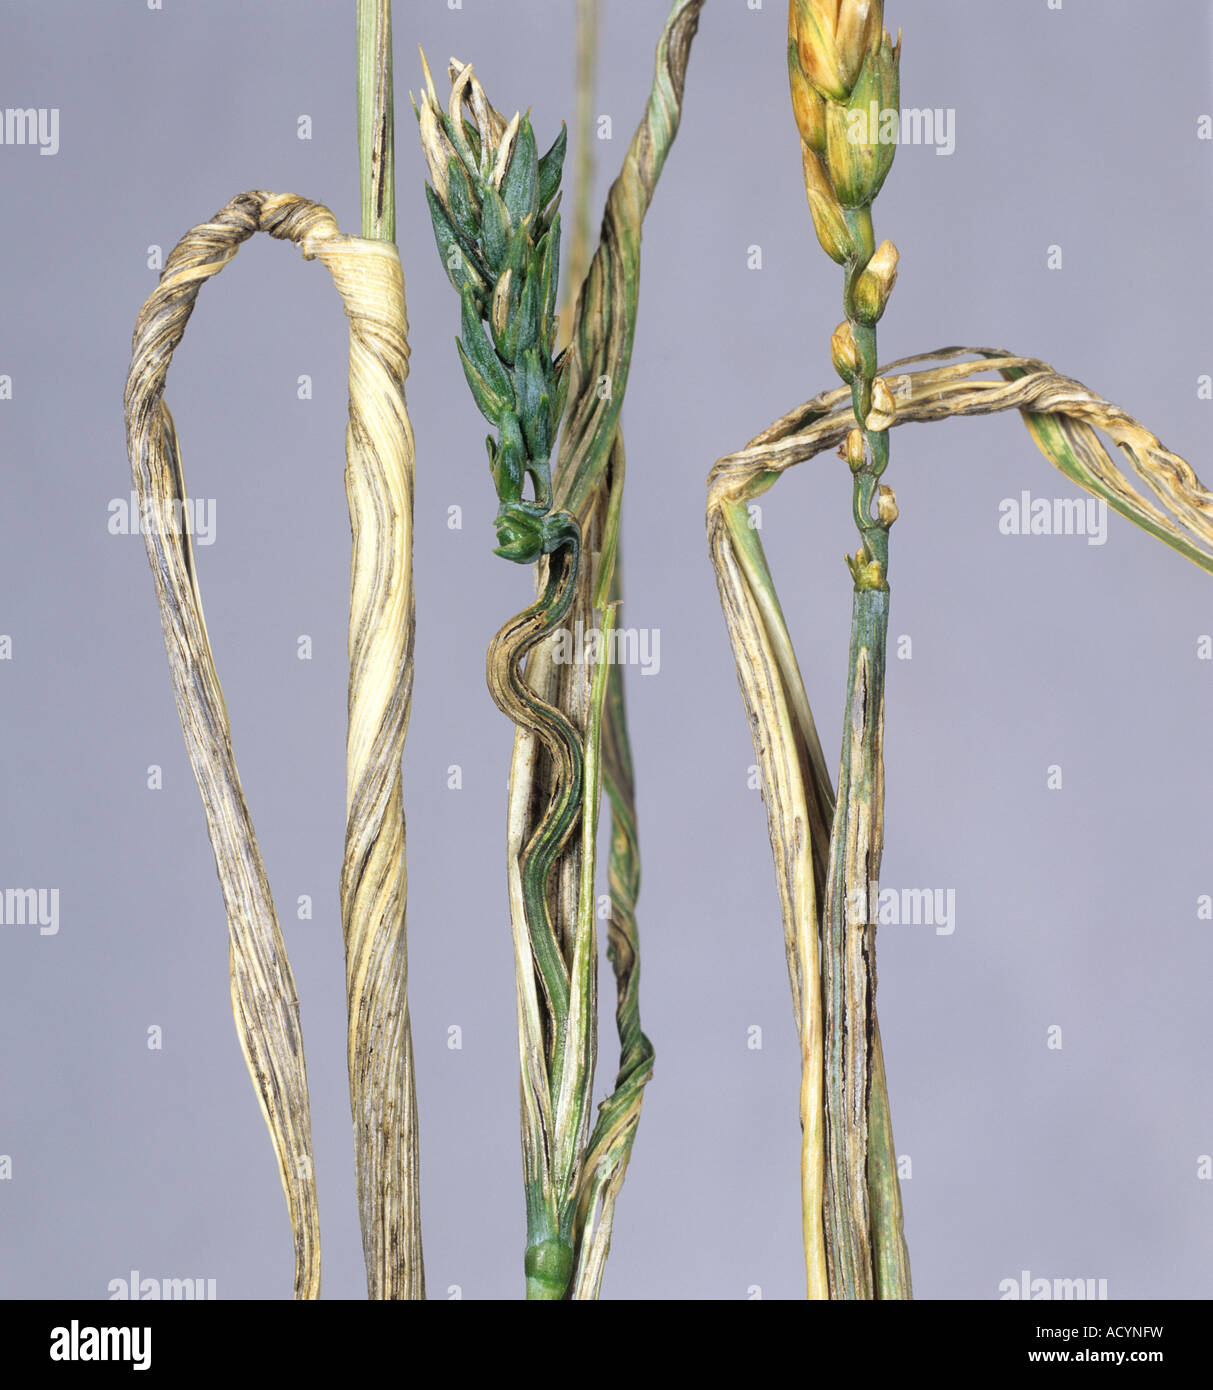 Flag smut Urocystis agropyri distorted and infected wheat ears flag leaf Stock Photo